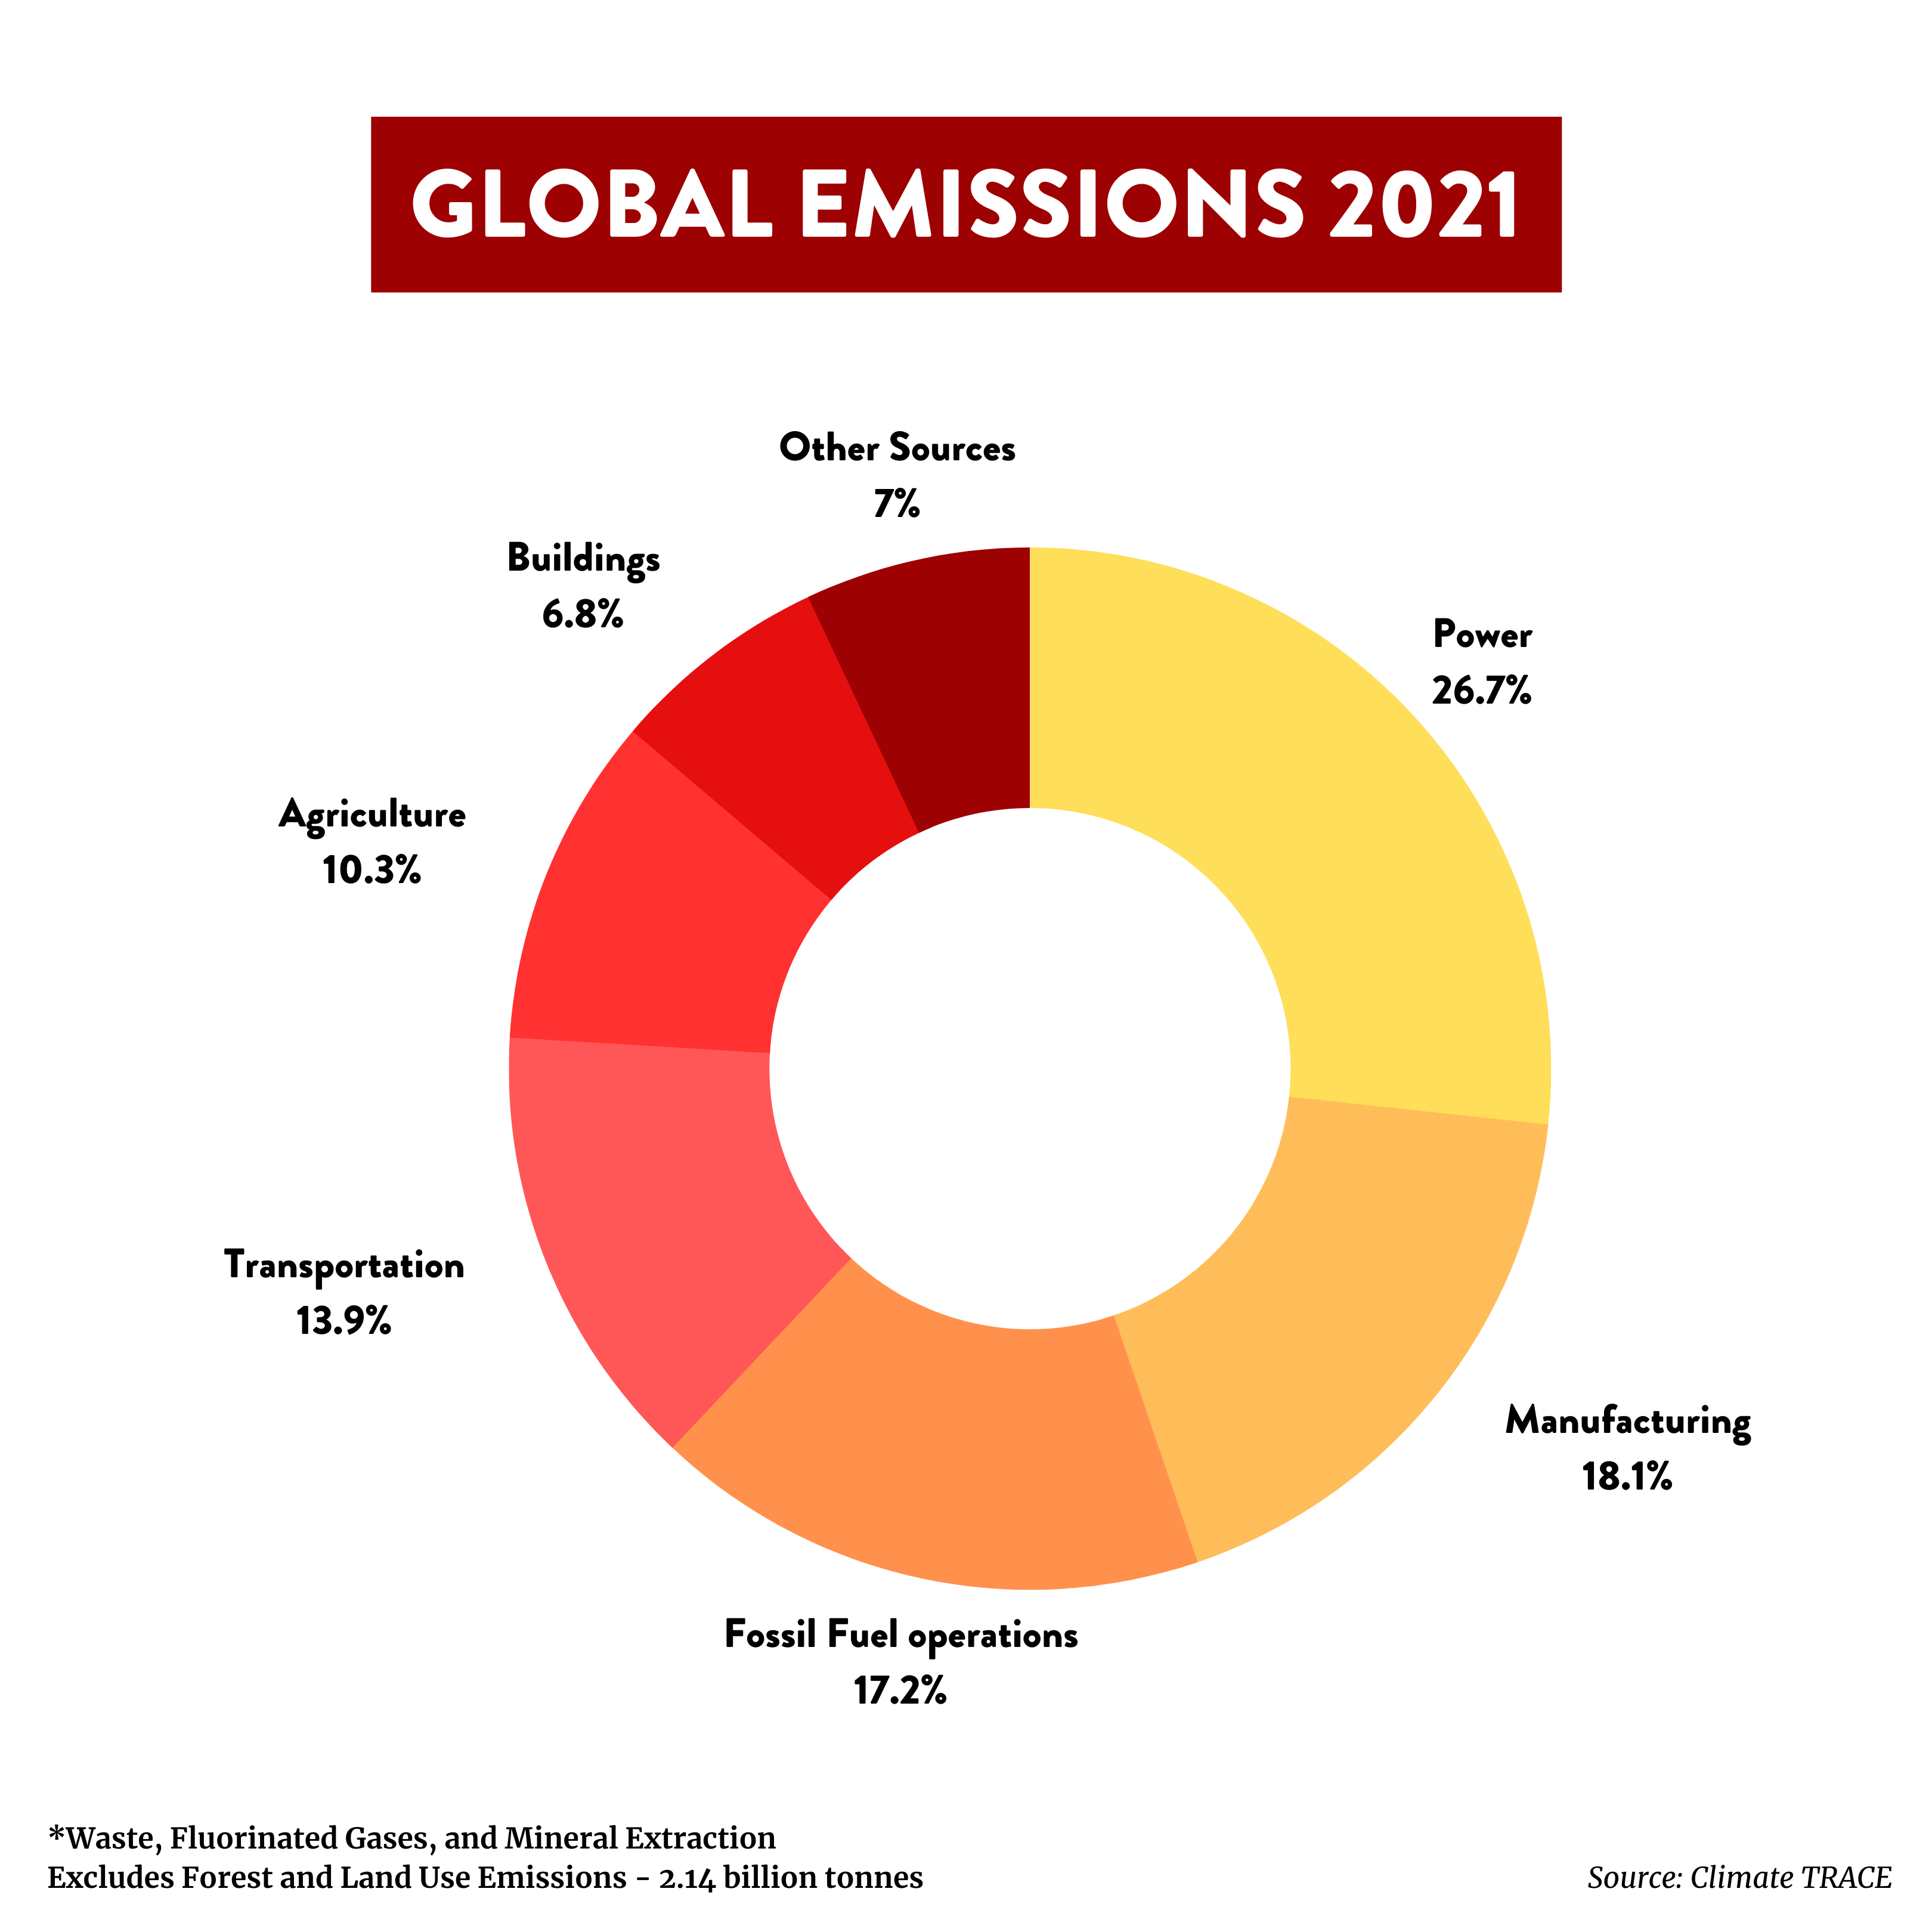 sources of pollution in 2021 include power,manufacturing, fossil fuel operations, transportation, agriculture, buildings, and other smaller sources.